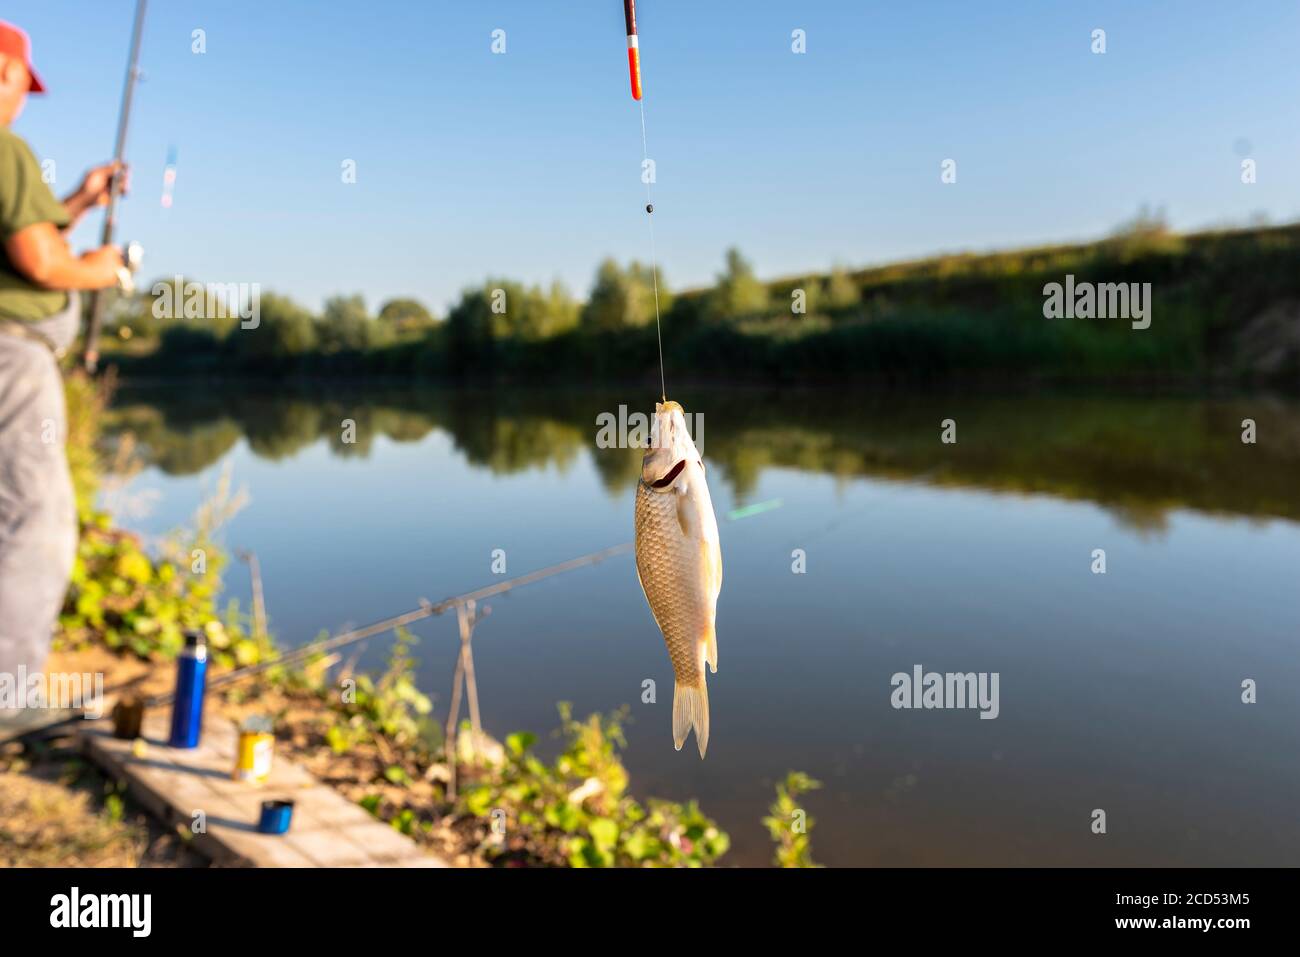 Fish Caught In The Lake Hanging On A Fishing Line And Hook Stock